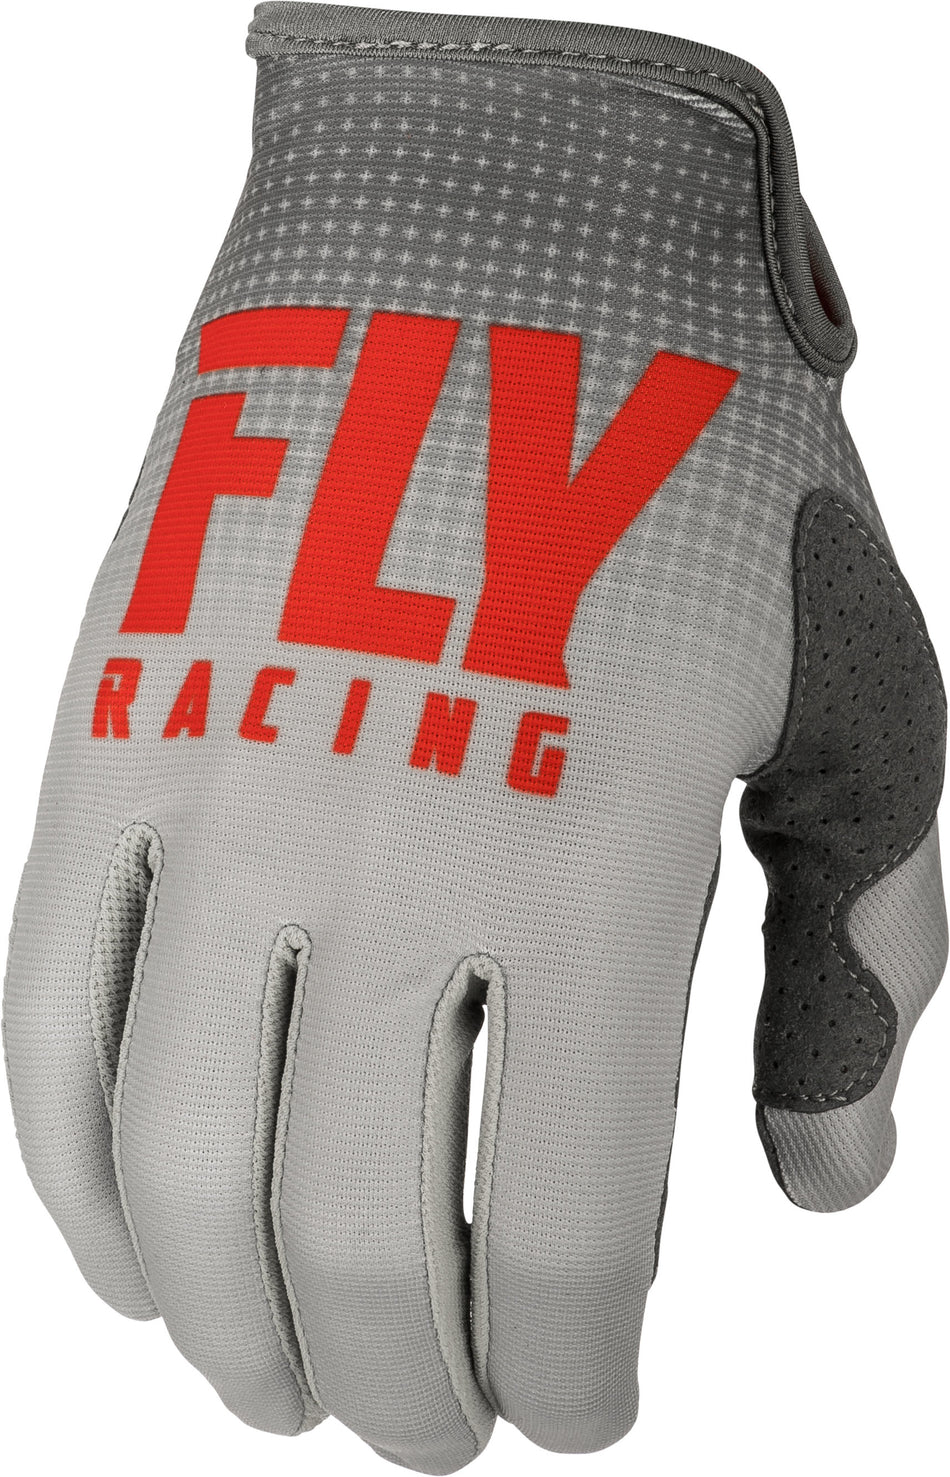 FLY RACING Lite Gloves Red/Grey Sz 07 372-01207